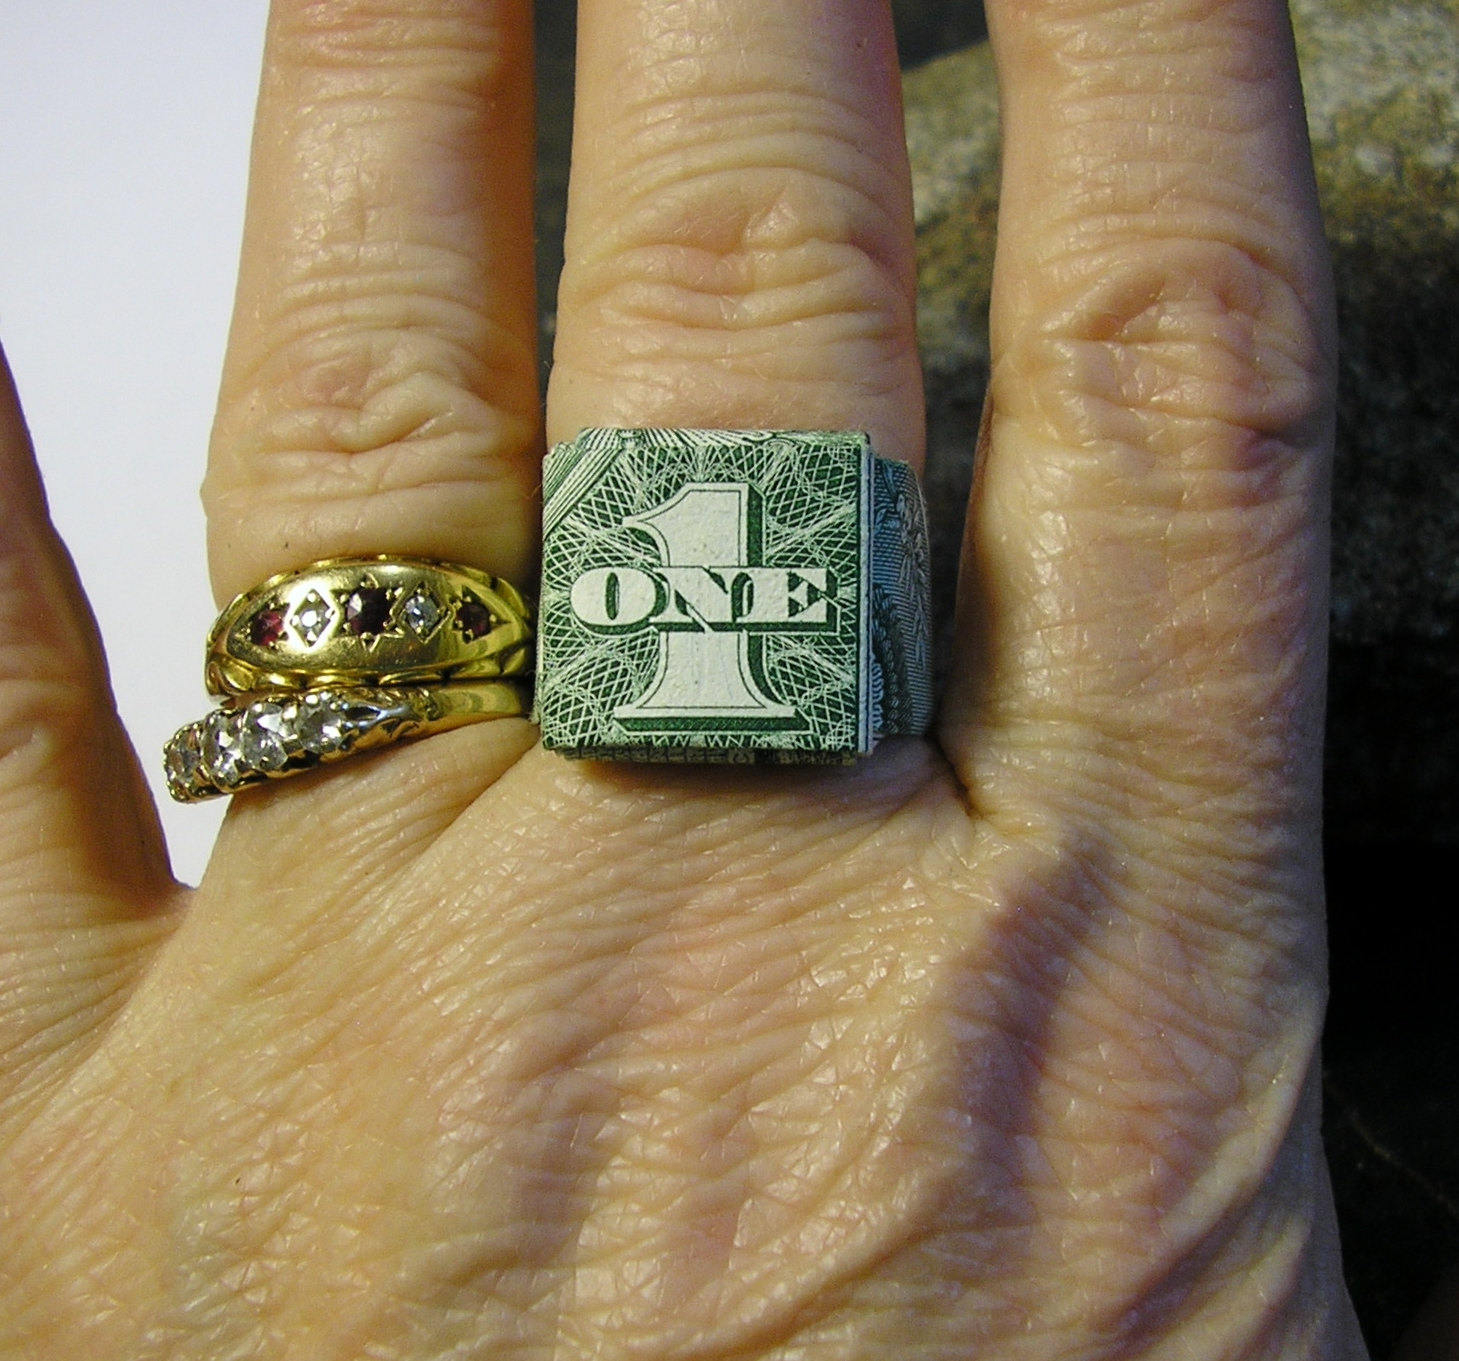 Dollar Ring Origami Dollar Bill Ring Money Origami Same Charge For Any Denomination Custom Made Sized To Order Genuine Us Currency